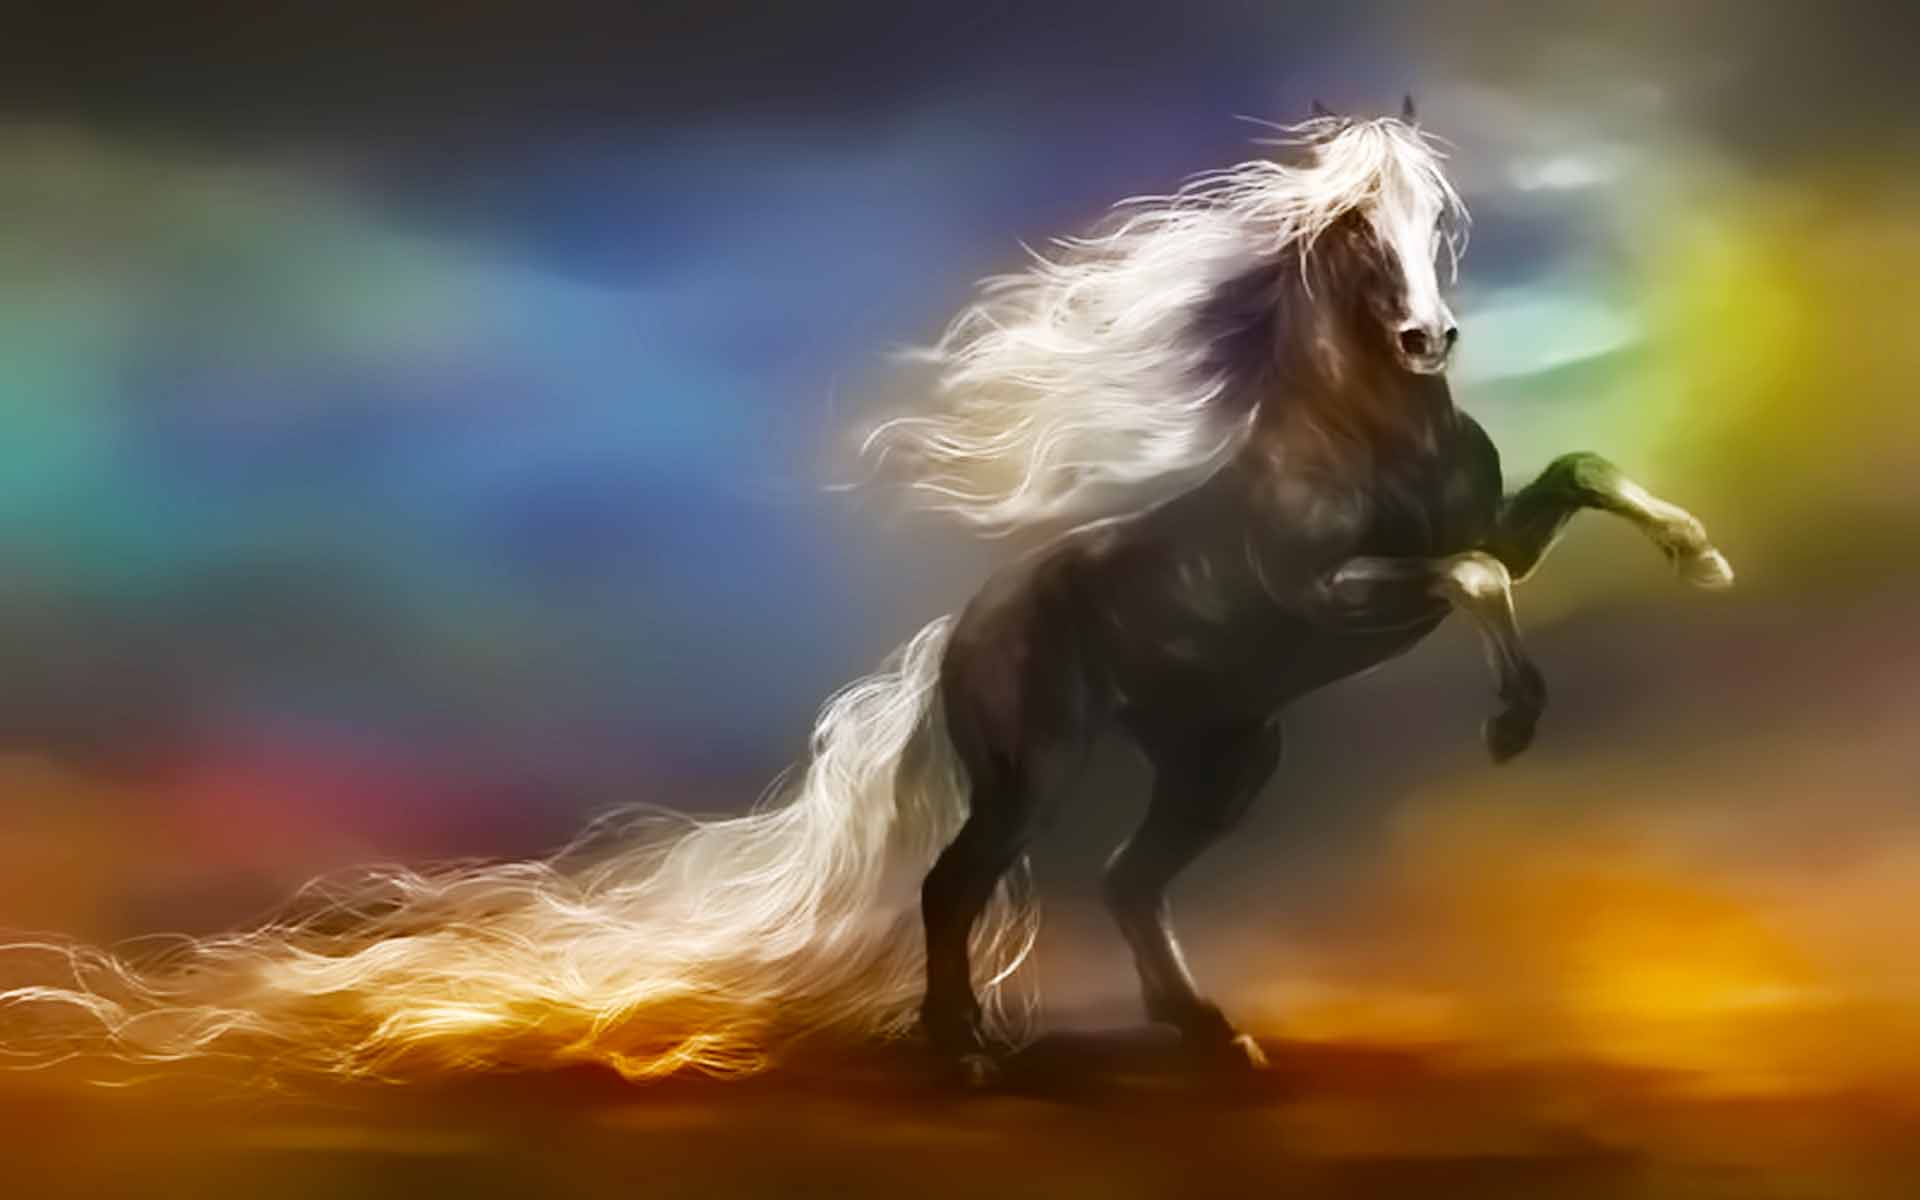 Horse wallpaper   Horse Long Tail Beauty Wallpapers   HD Wallpapers